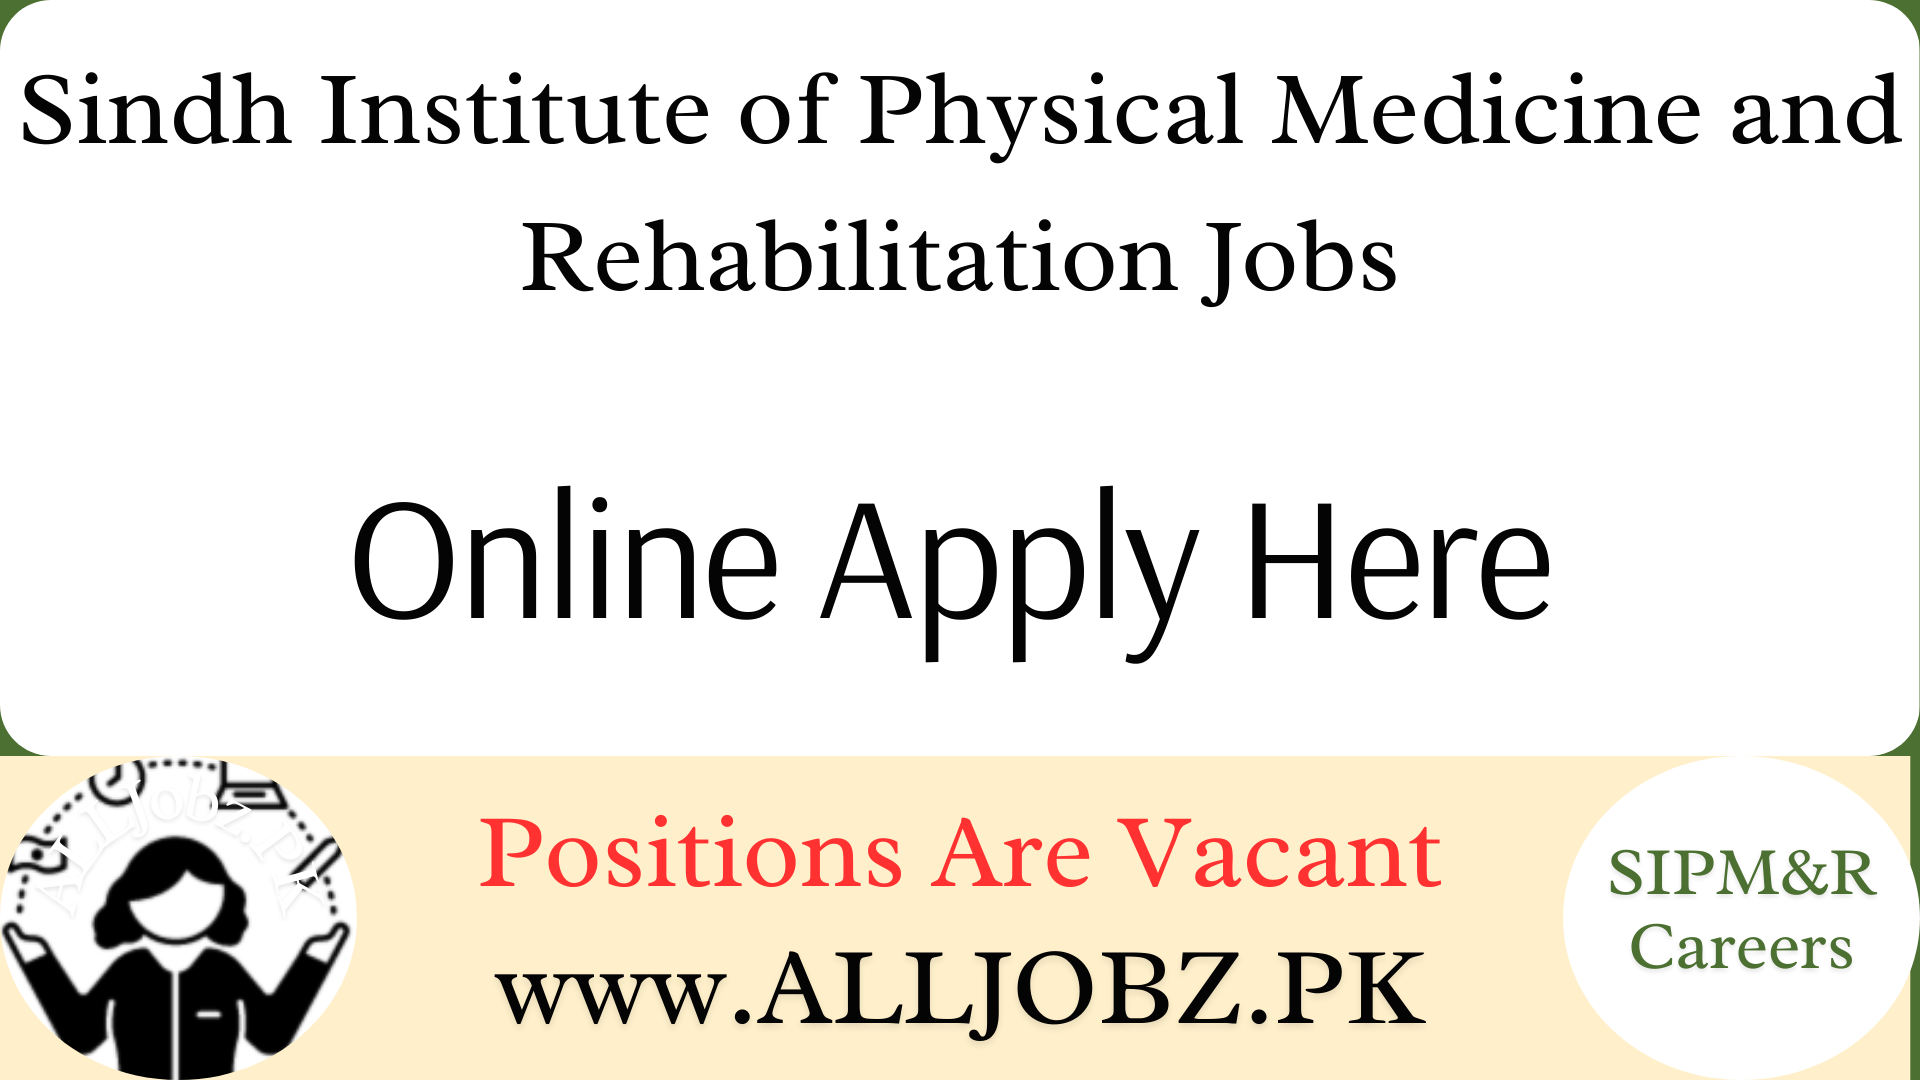 Sindh Institute Of Physical Medicine And Rehabilitation Jobs, Professor Jobs Pakistan, Physical Medicine Professor Jobs, Pm&Amp;R Professor Jobs Pakistan, Karachi Professor Jobs, Rehabilitation Medicine Professor Jobs, Public Sector Professor Jobs Pakistan, Hec Approved Professor Jobs, Physical Therapy Professor Jobs, Disability Rehabilitation Professor Jobs, Sindh Institute Professor Jobs